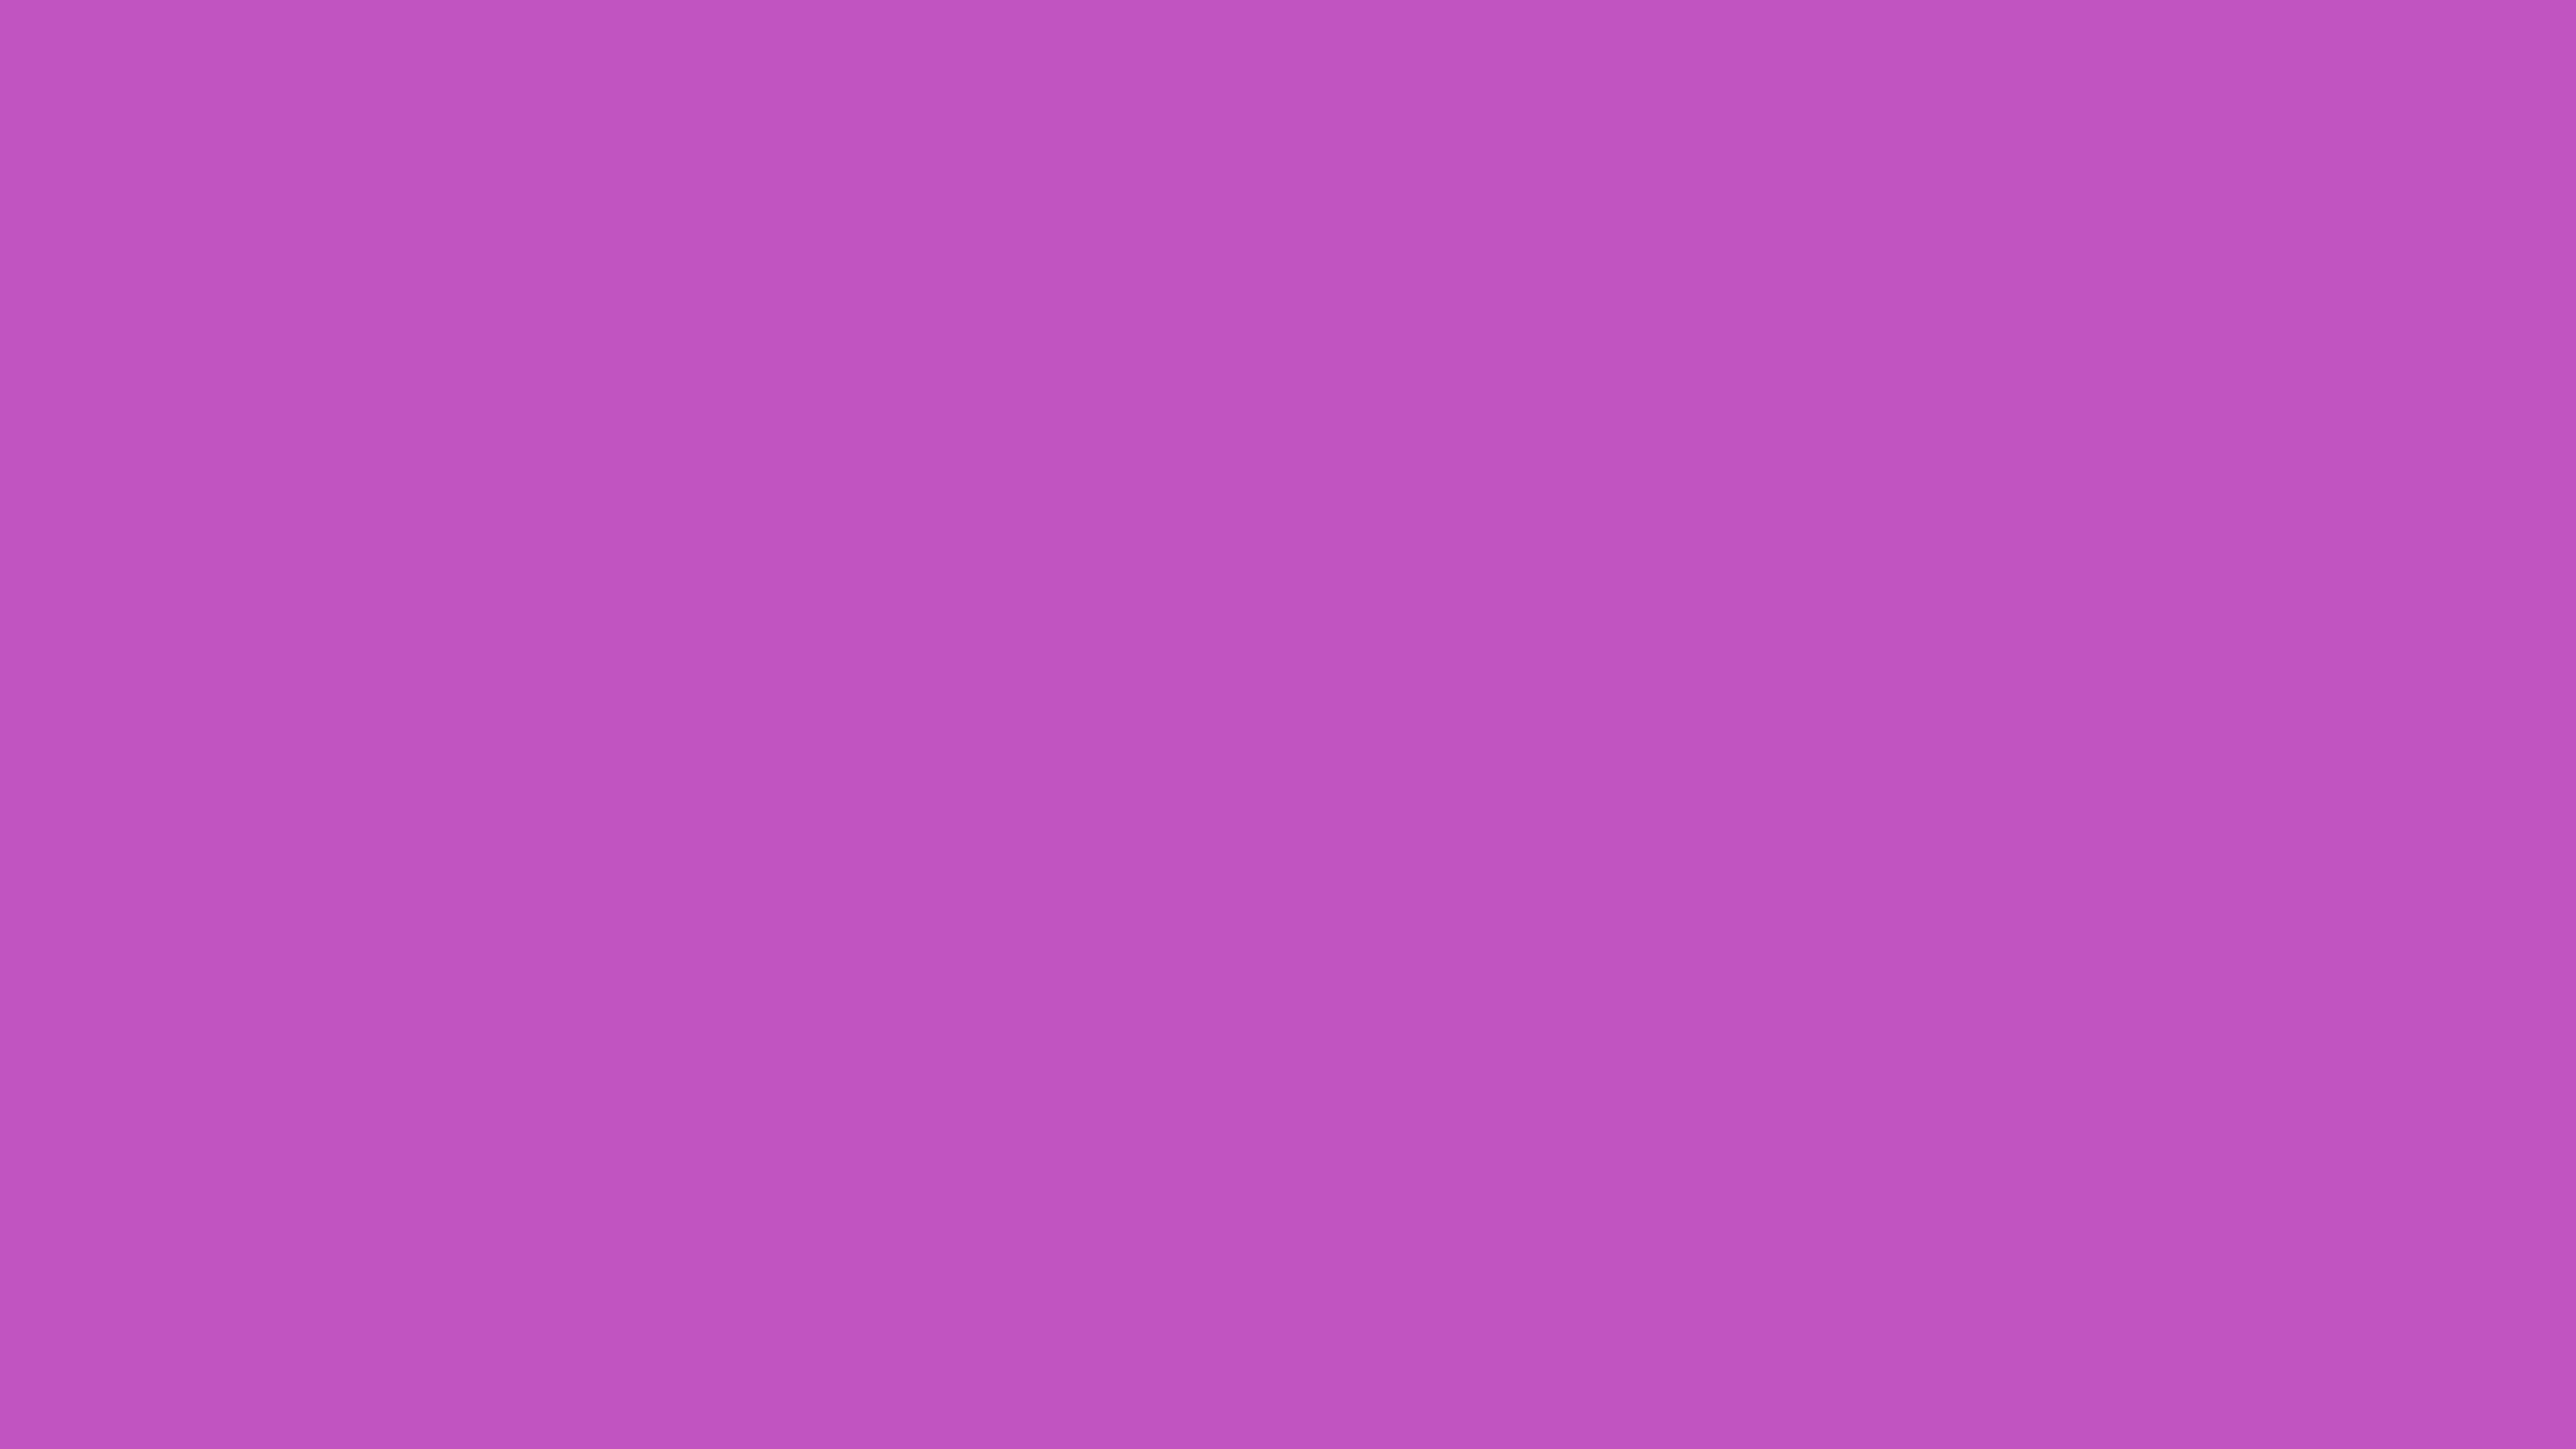 4096x2304 Deep Fuchsia Solid Color Background